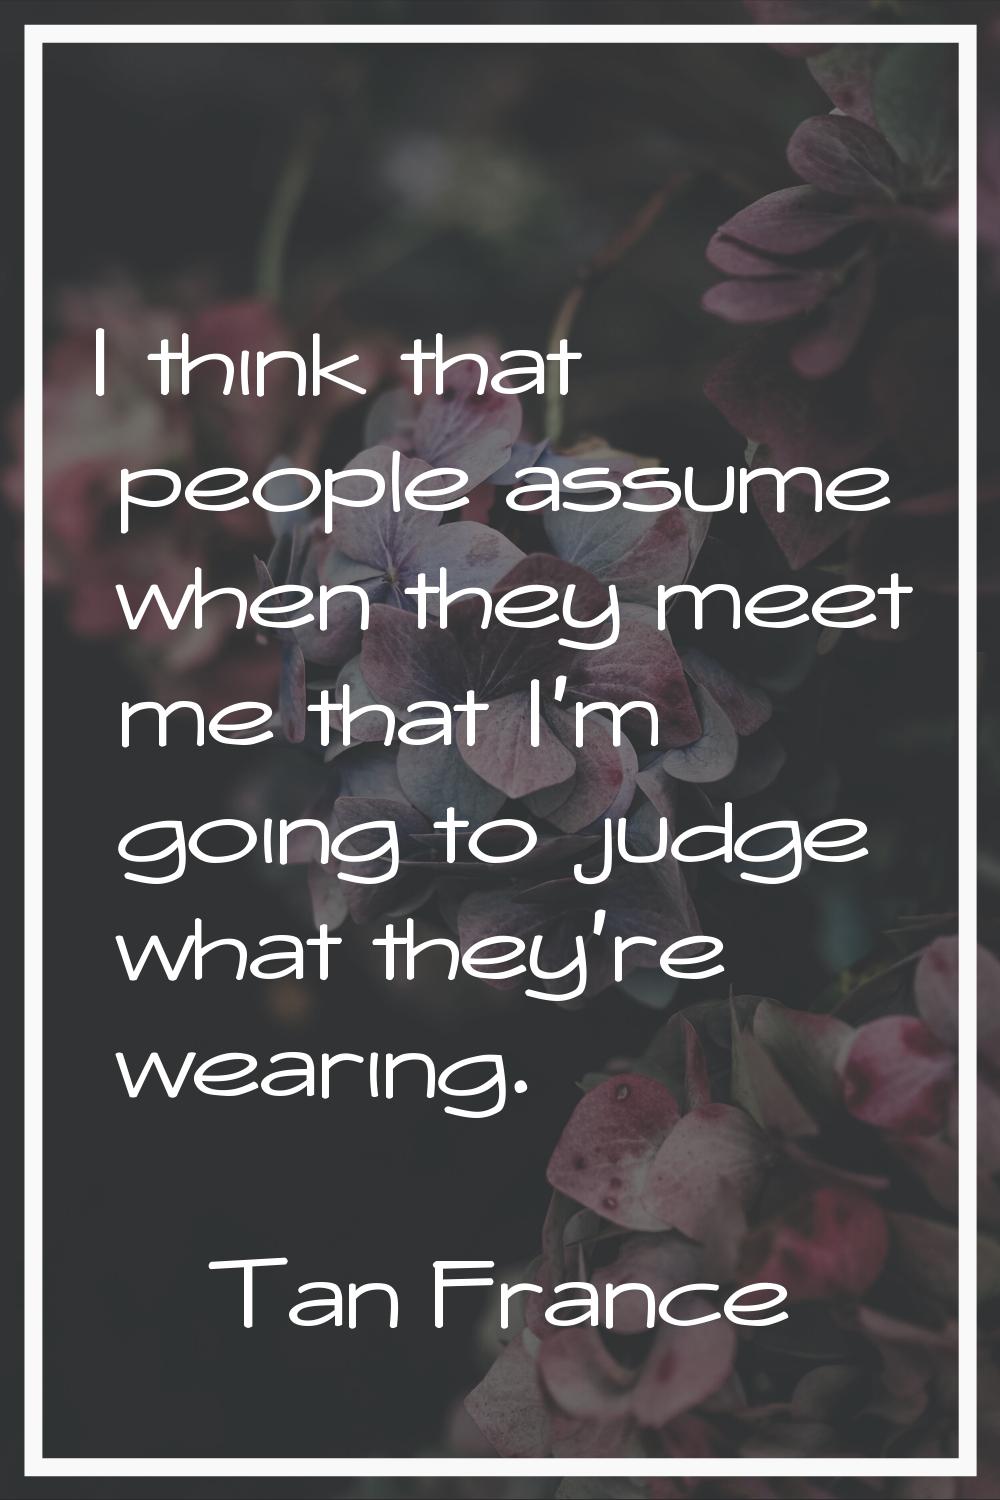 I think that people assume when they meet me that I'm going to judge what they're wearing.